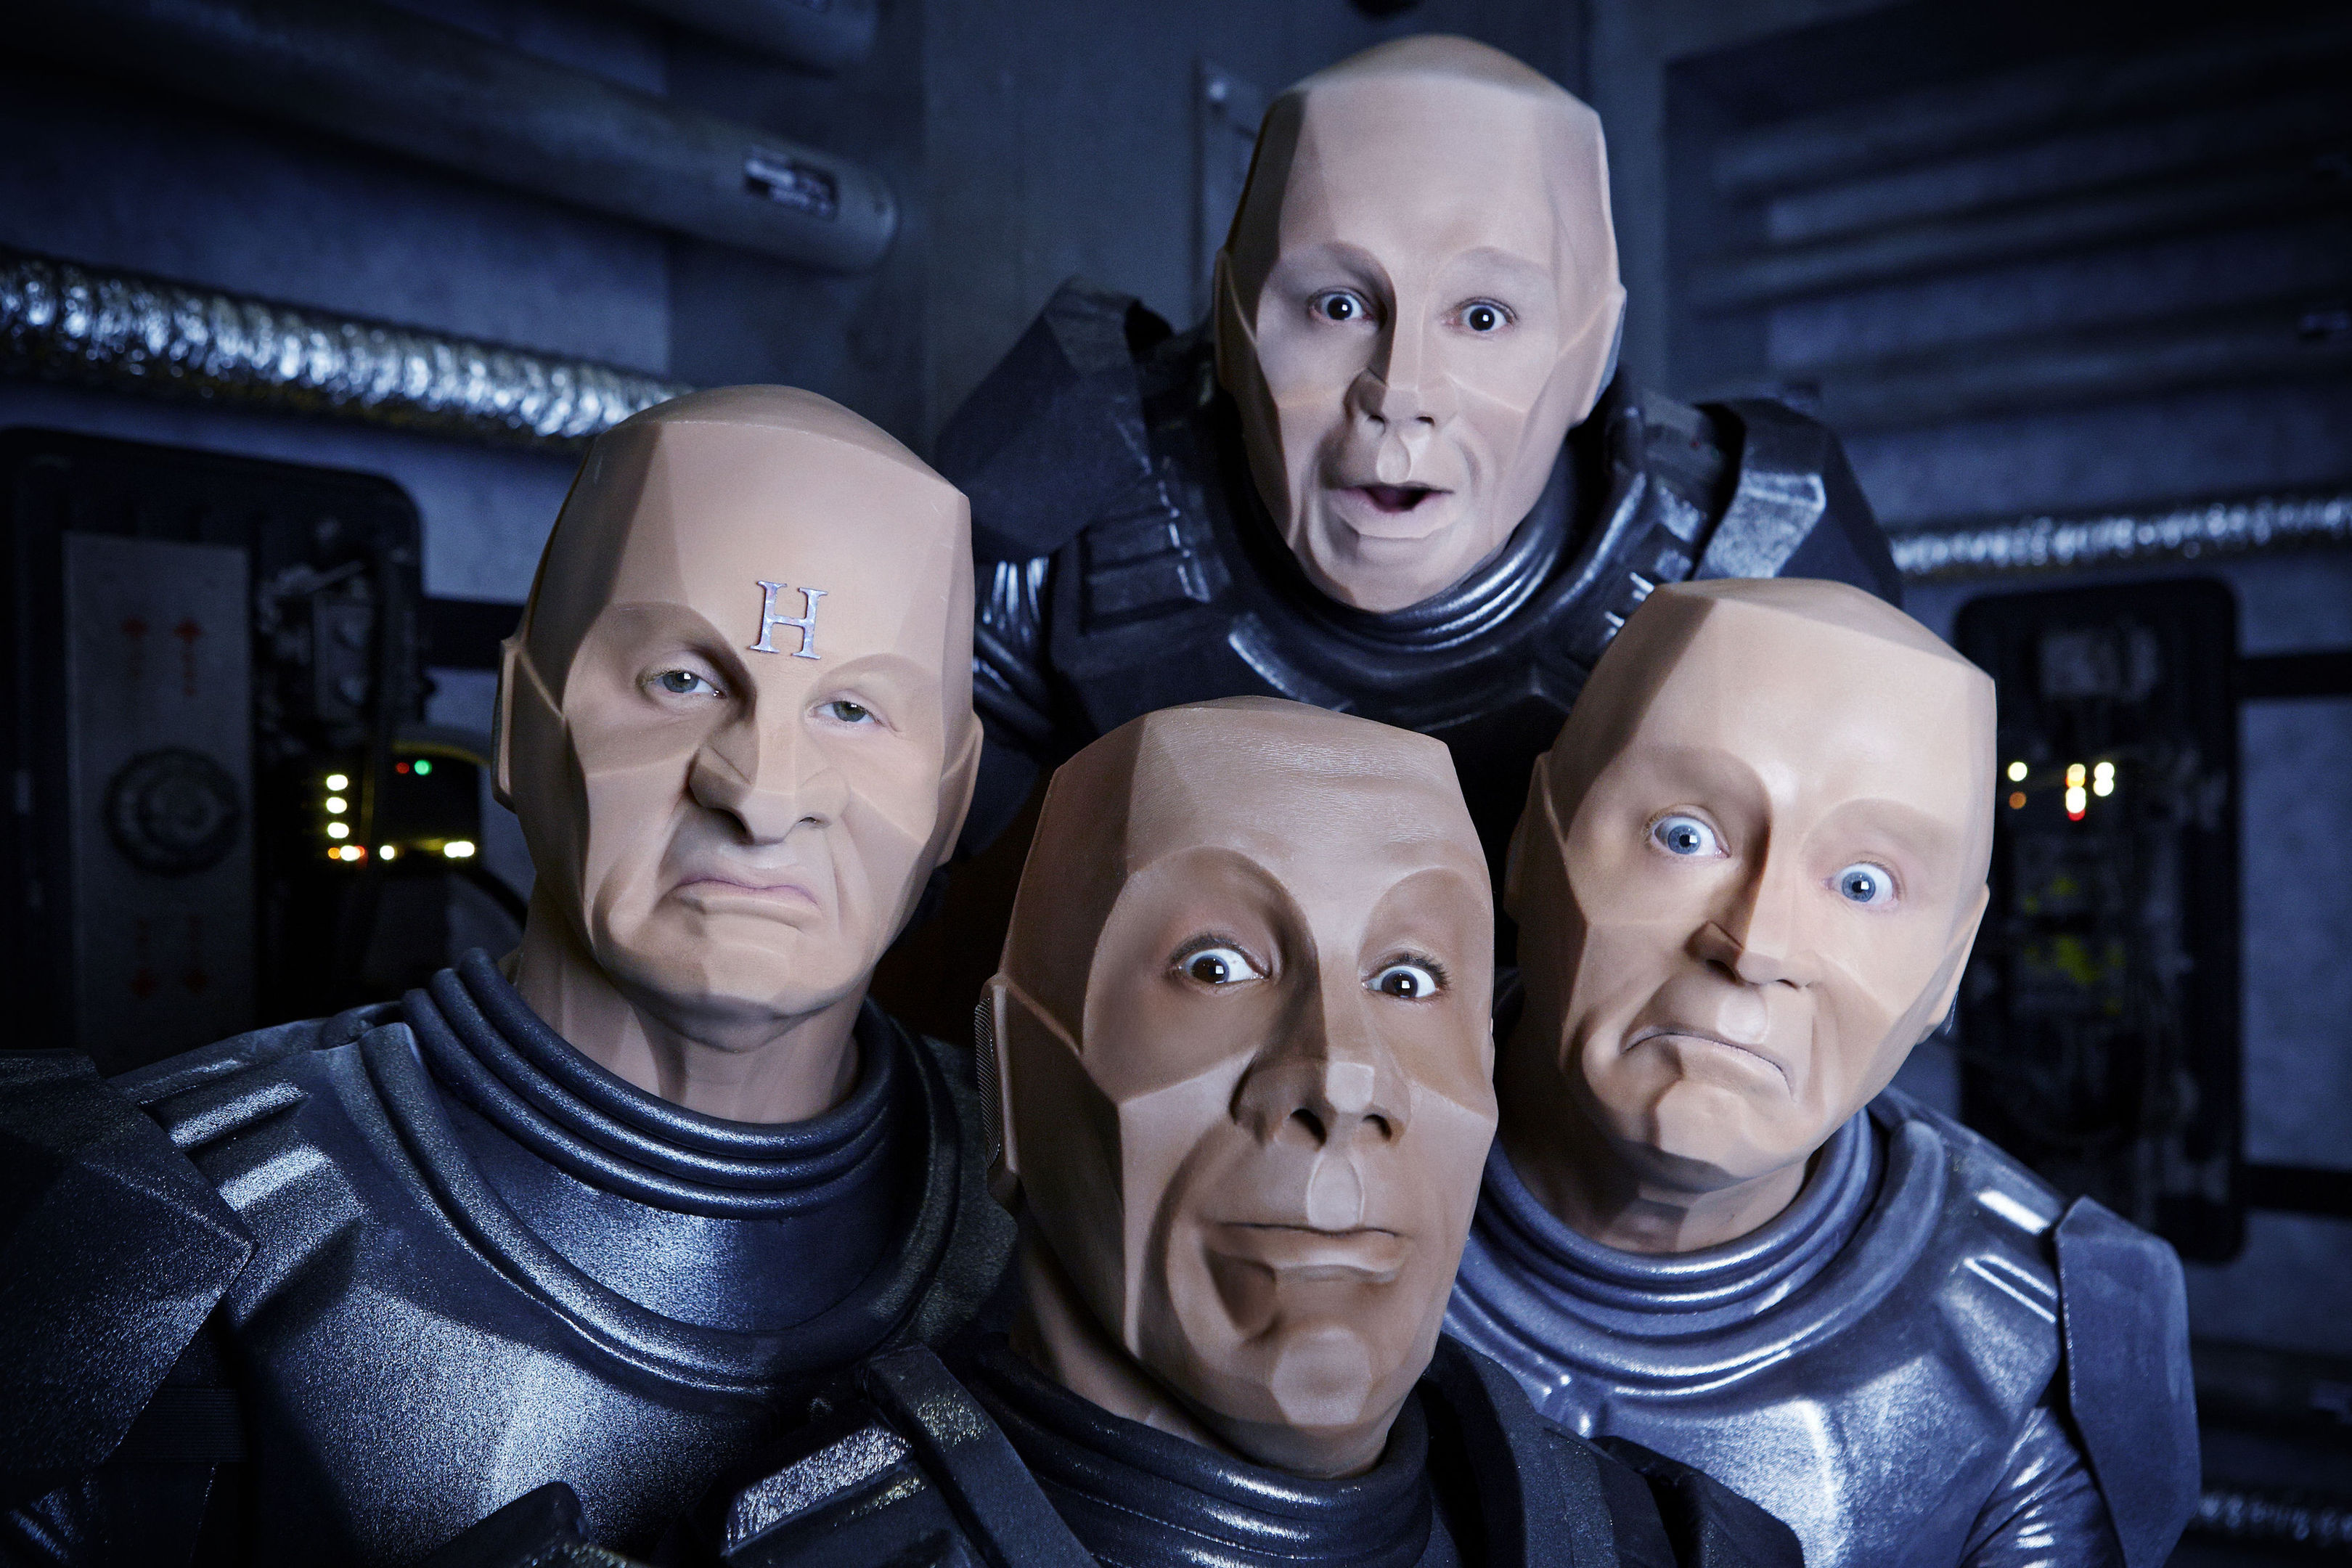 The cast - Craig Charles, and Chris Barrie, Danny John-Jules - spent hours in make-up to be transformed into mechanoids, a process usually only endured by Robert Llewellyn (UKTV/PA Wire)